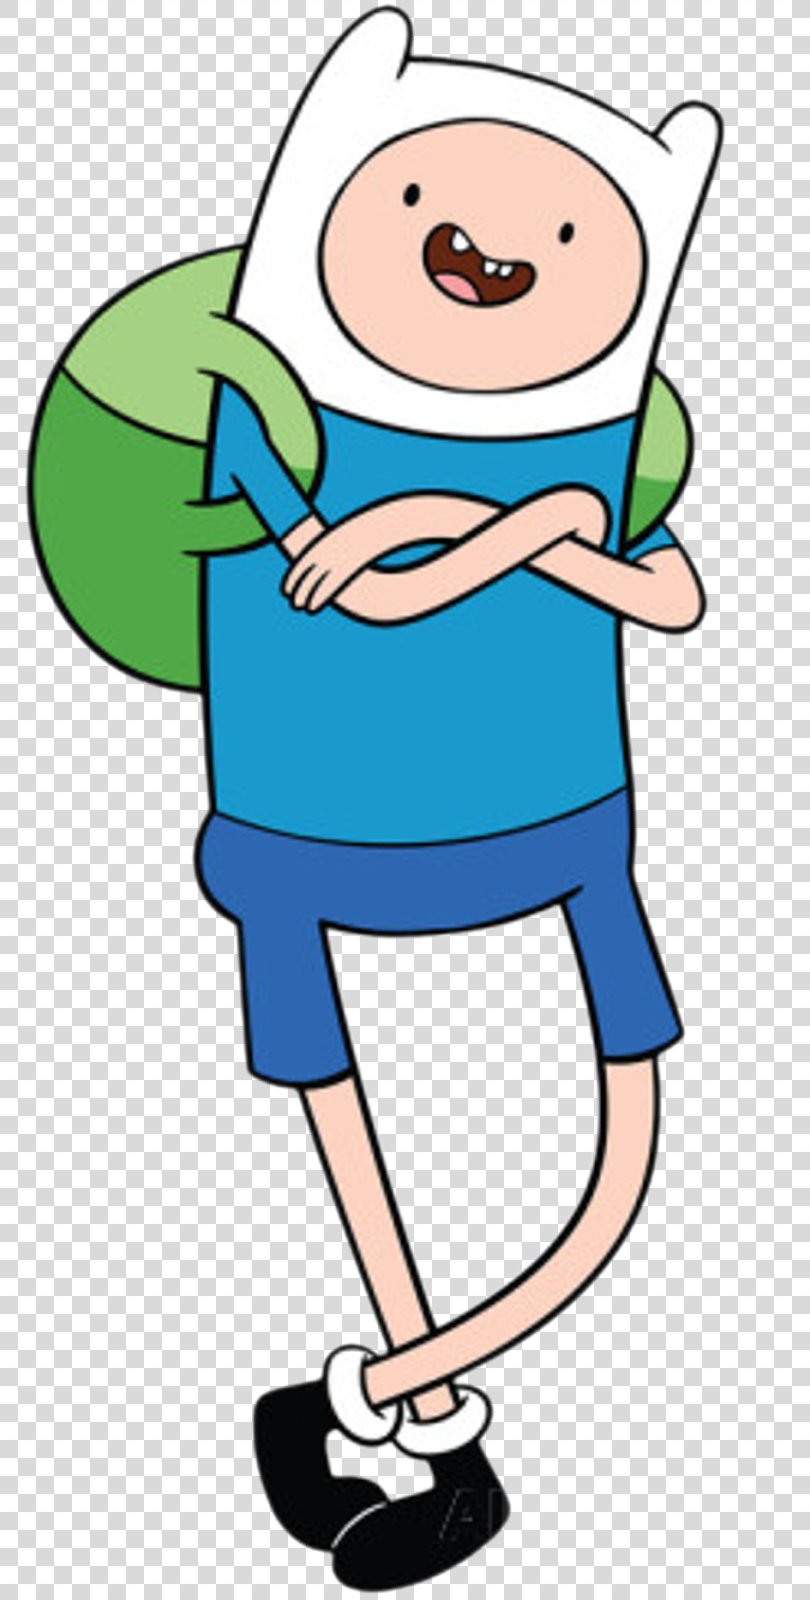 Finn The Human Jake The Dog Marceline The Vampire Queen Cartoon Network Universe: FusionFall, Cartoon Characters PNG